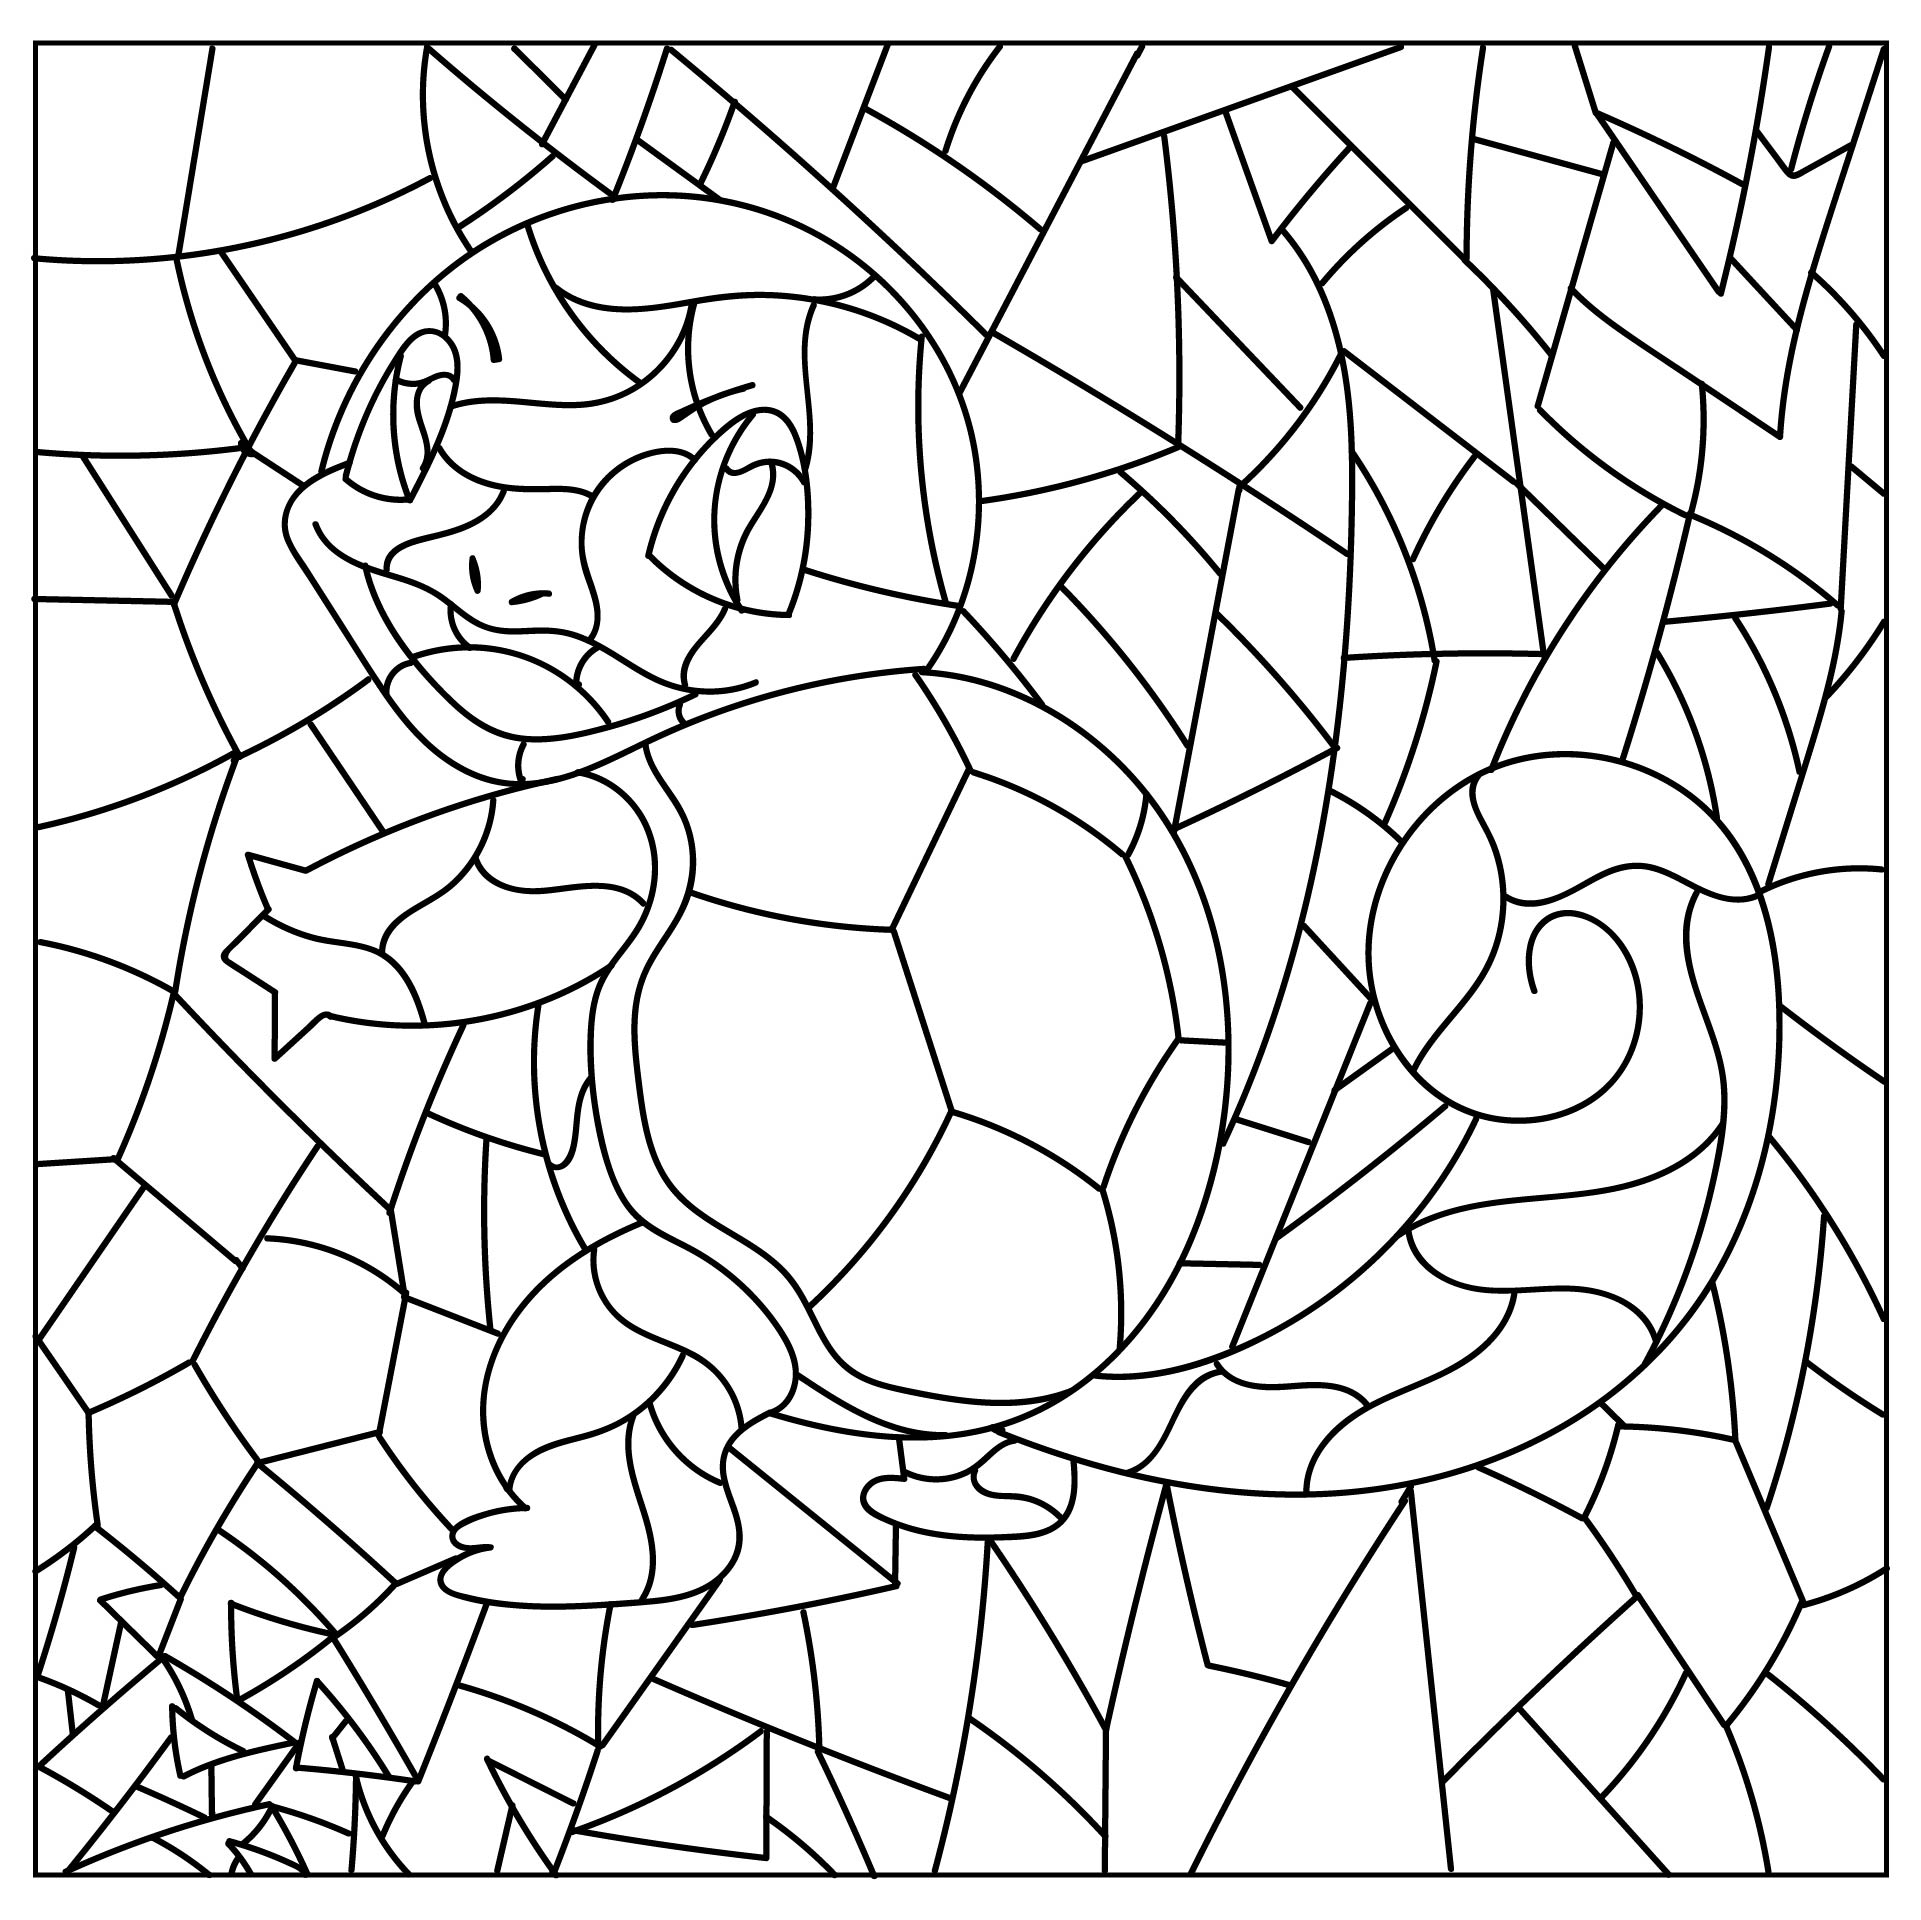 5 Best Images of Mystery Mosaics Printables Mystery Mosaics Coloring